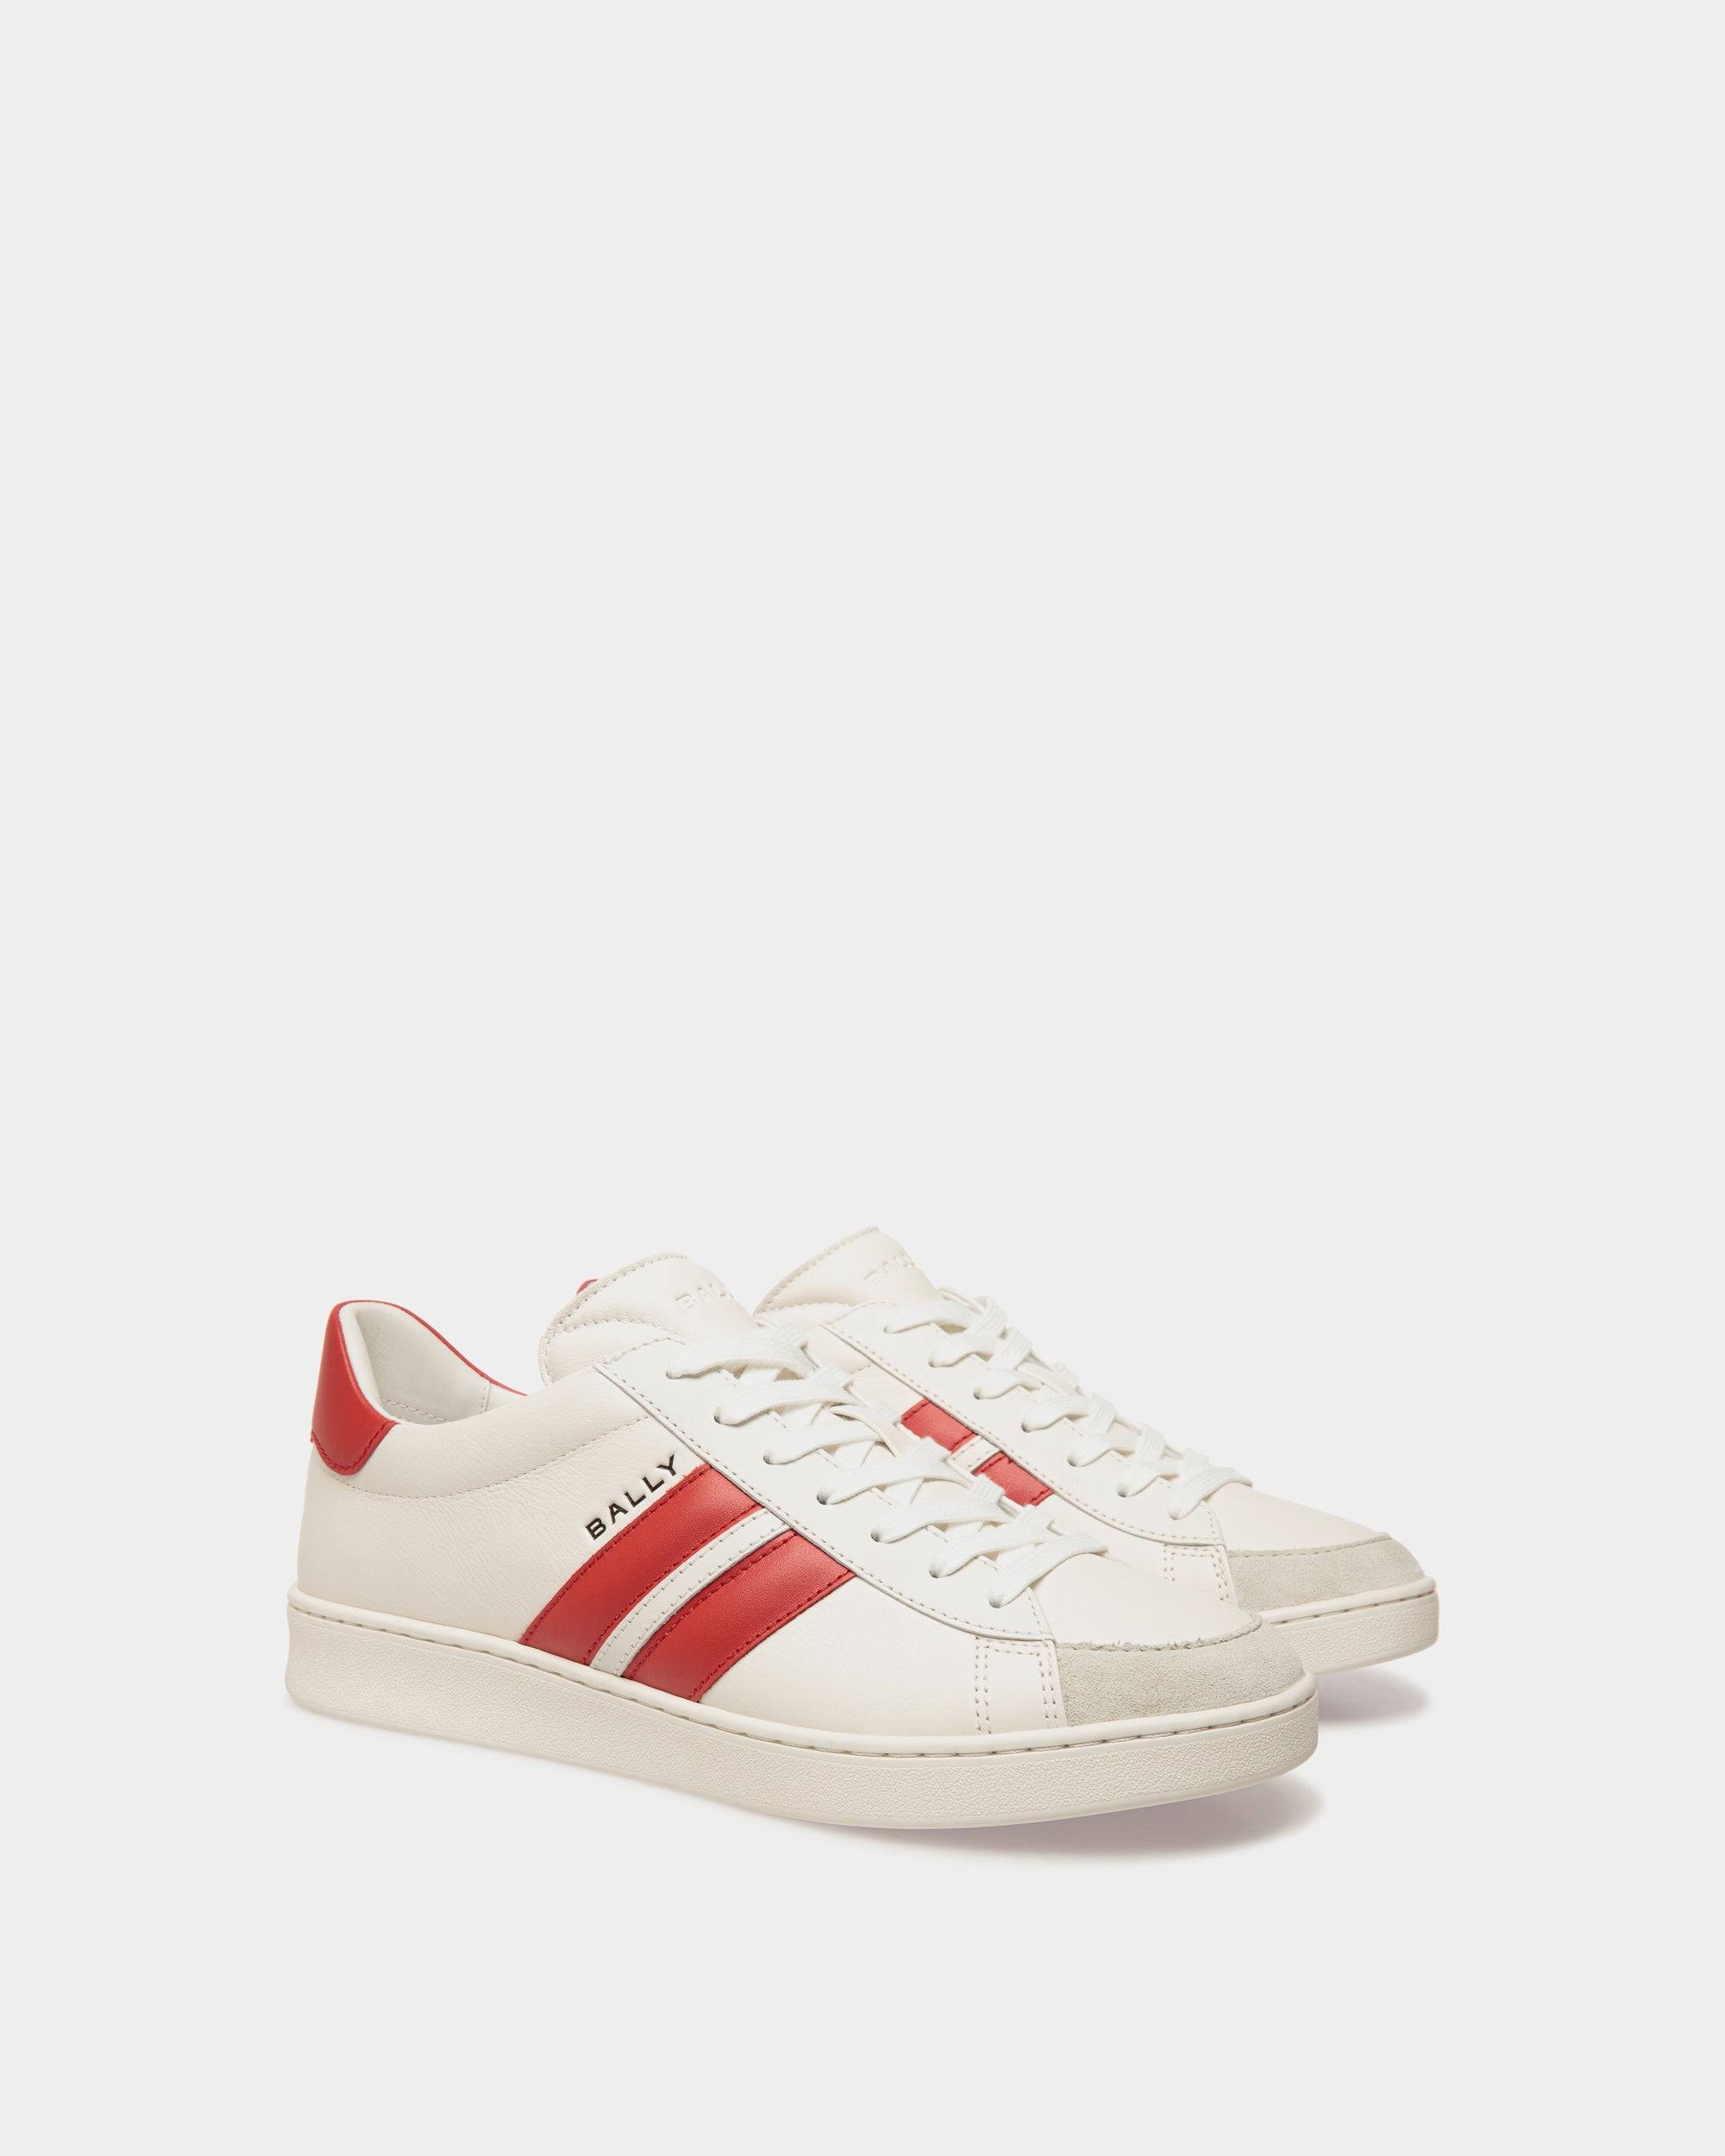 Tennis Sneaker in White and Candy Red Leather - Men's - Bally - 03